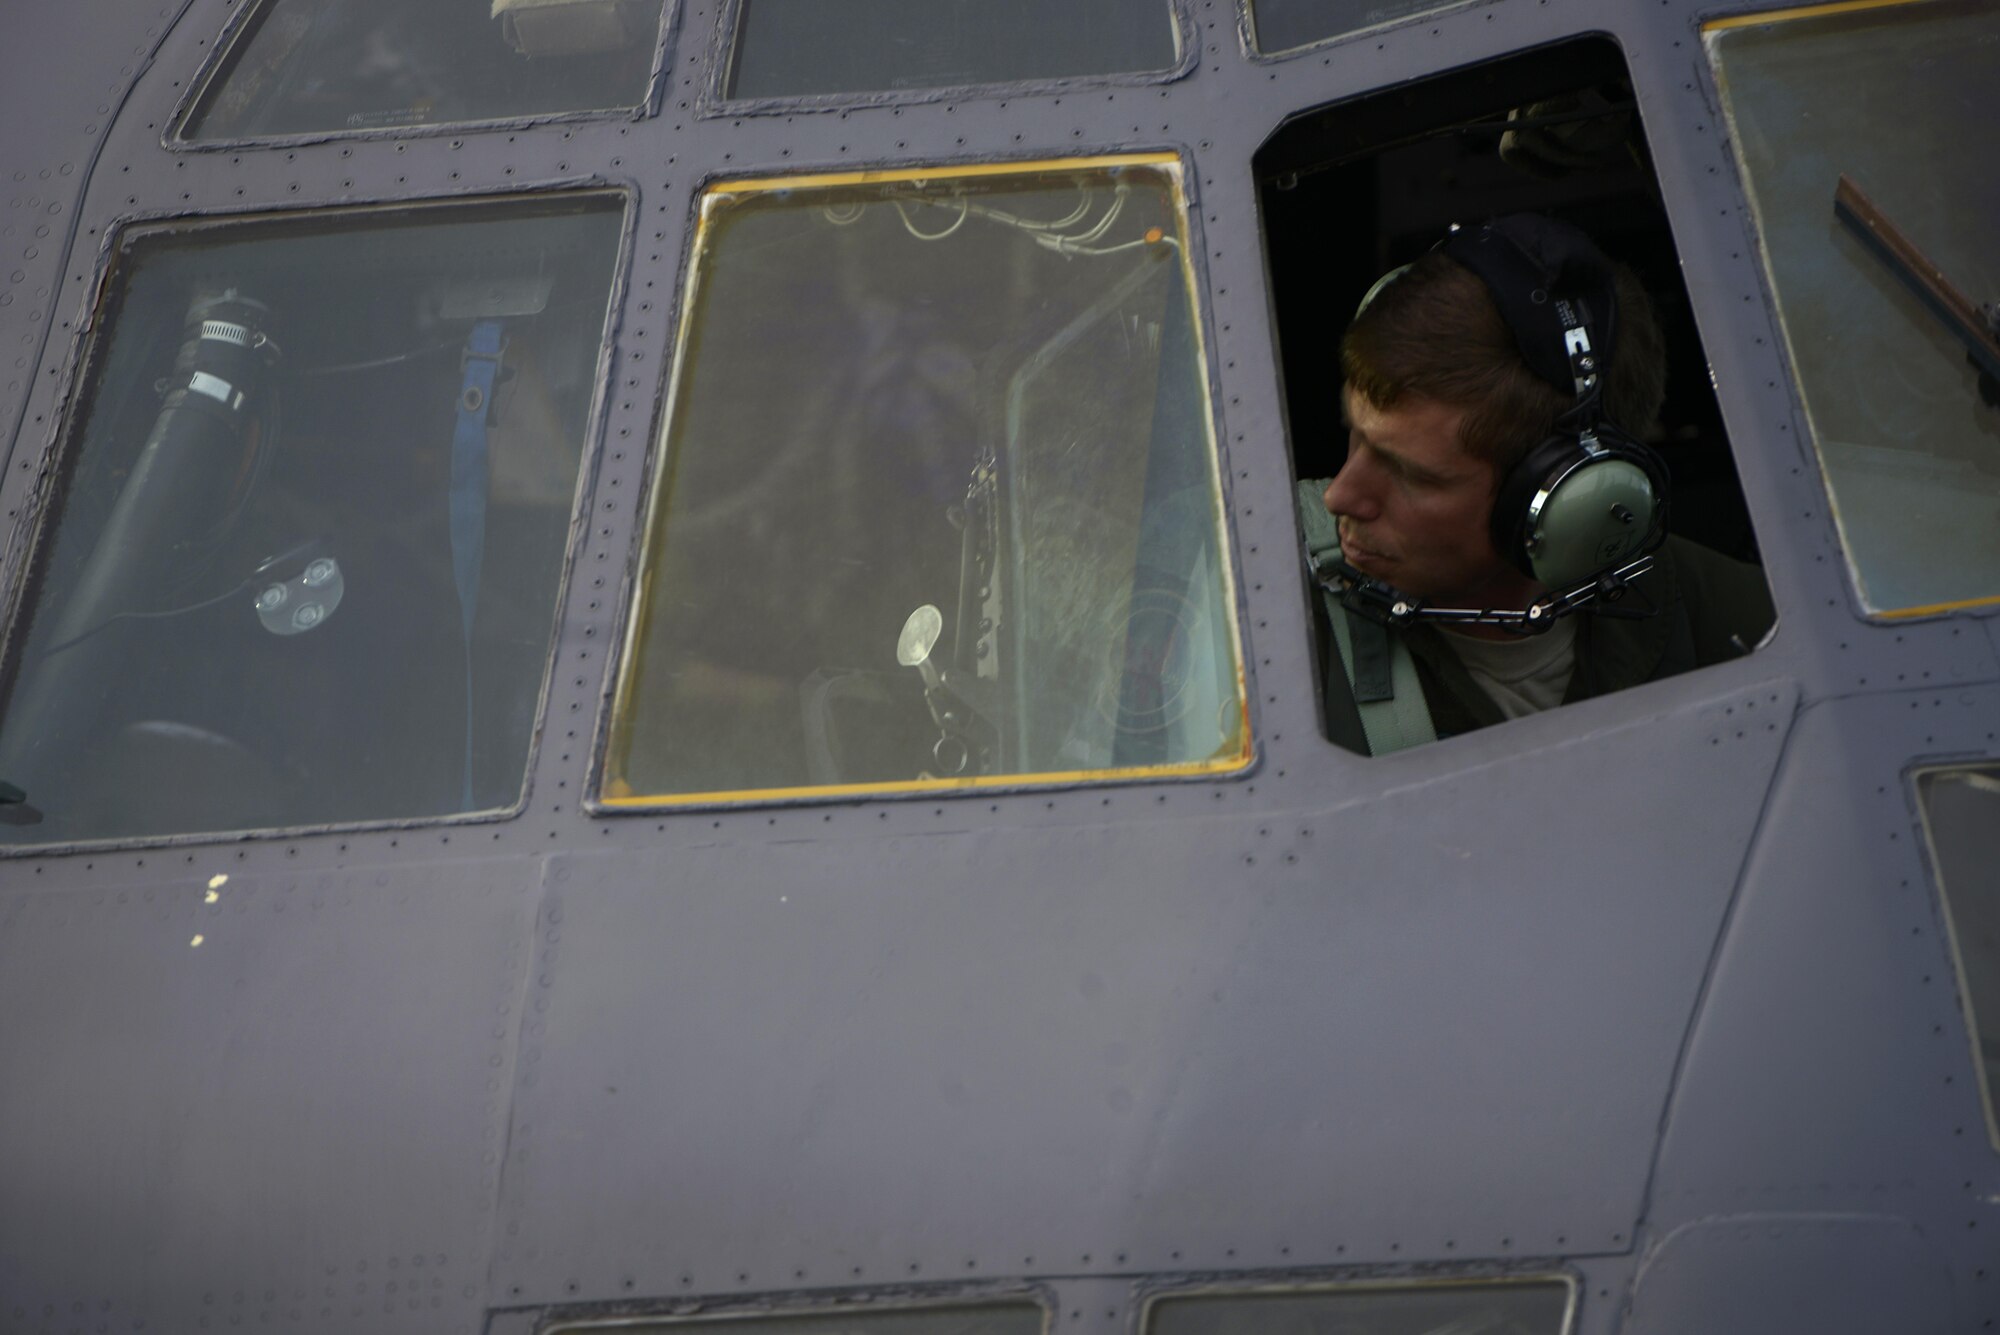 U.S. Air Force Lt. Col. David Lucas, an MC-130H Combat Talon II pilot and the director of operations at the 1st Special Operations Squadron, looks out the window of a 1st SOS MC-130H Combat Talon II before takeoff on the Kadena Air Base, Japan, flight line May 14, 2015. The 1st Special Operations Squadron is one of five squadrons that make up the 353rd Special Operations Group.  As the only Air Force special operations group in the Pacific, they are the focal point for Air Force special operations activities throughout the United States Pacific Command Theater. (U.S. Air Force photo by Staff Sgt. Maeson L. Elleman)